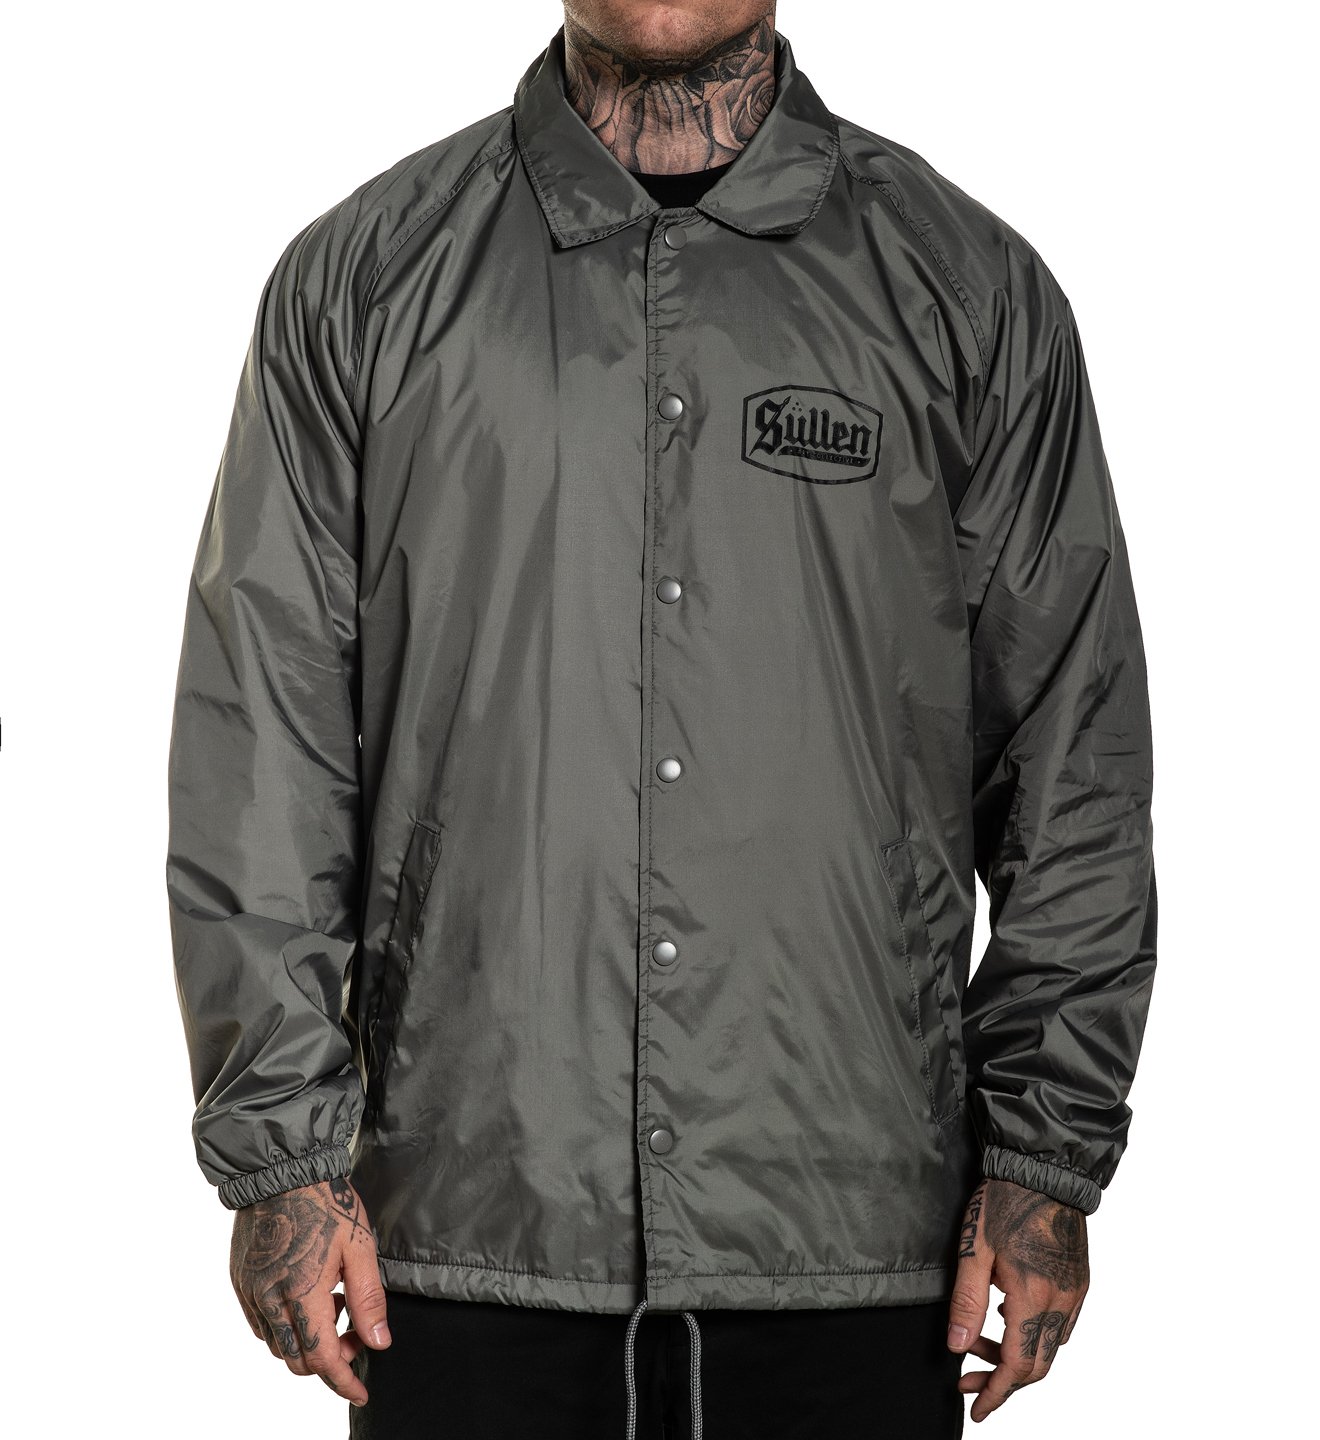 LINCOLN JACKET - Sullen Clothing